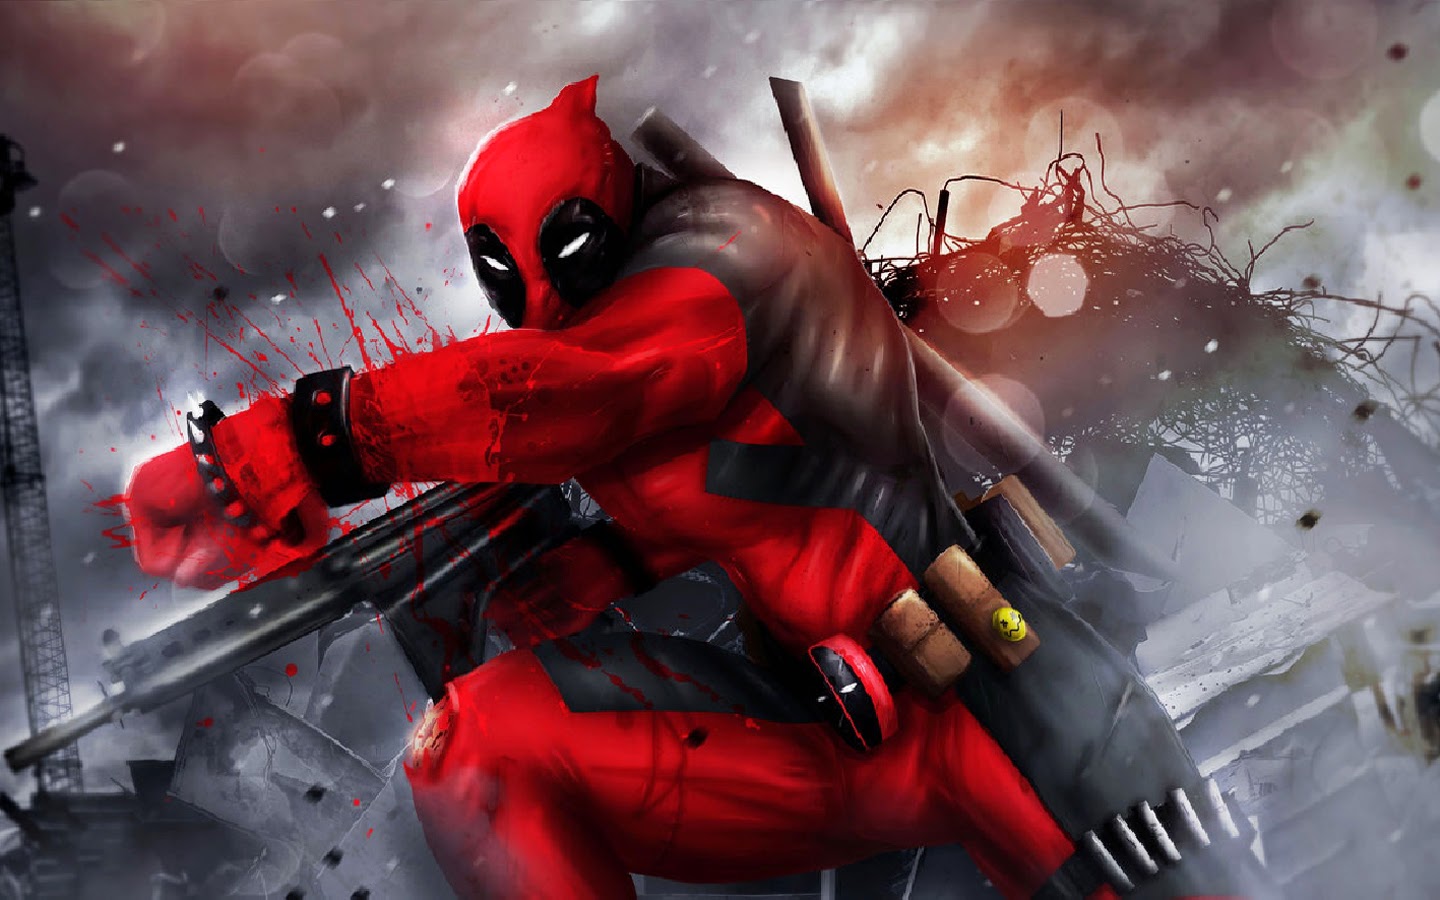 Top Cool Deadpool Wallpaper Image For